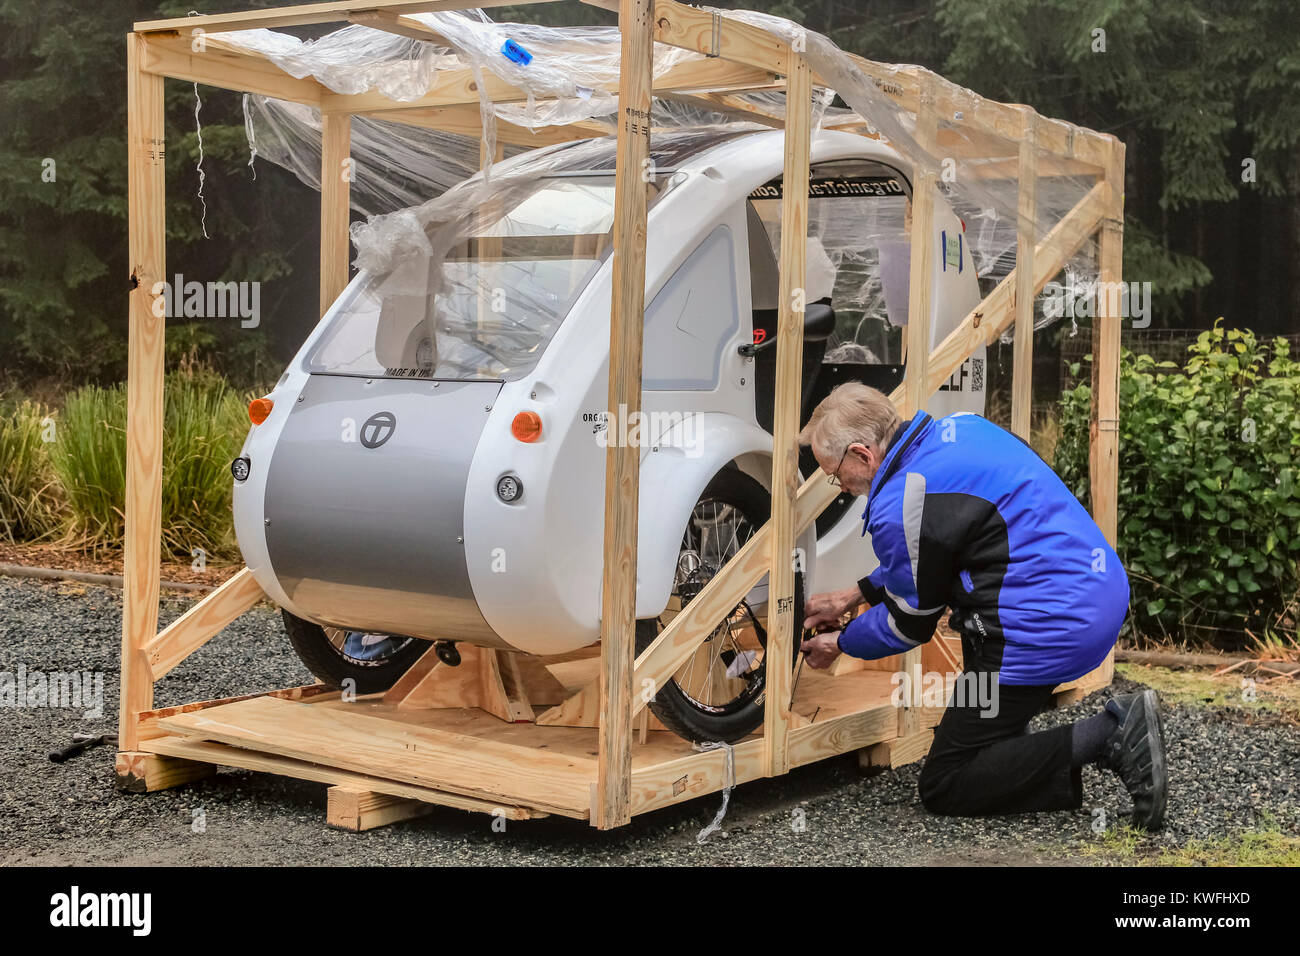 An elderly man in a blue coat kneels on the ground, using a tool to take apart a wooden shipping crate containing his new ELF electric tricycle. Stock Photo